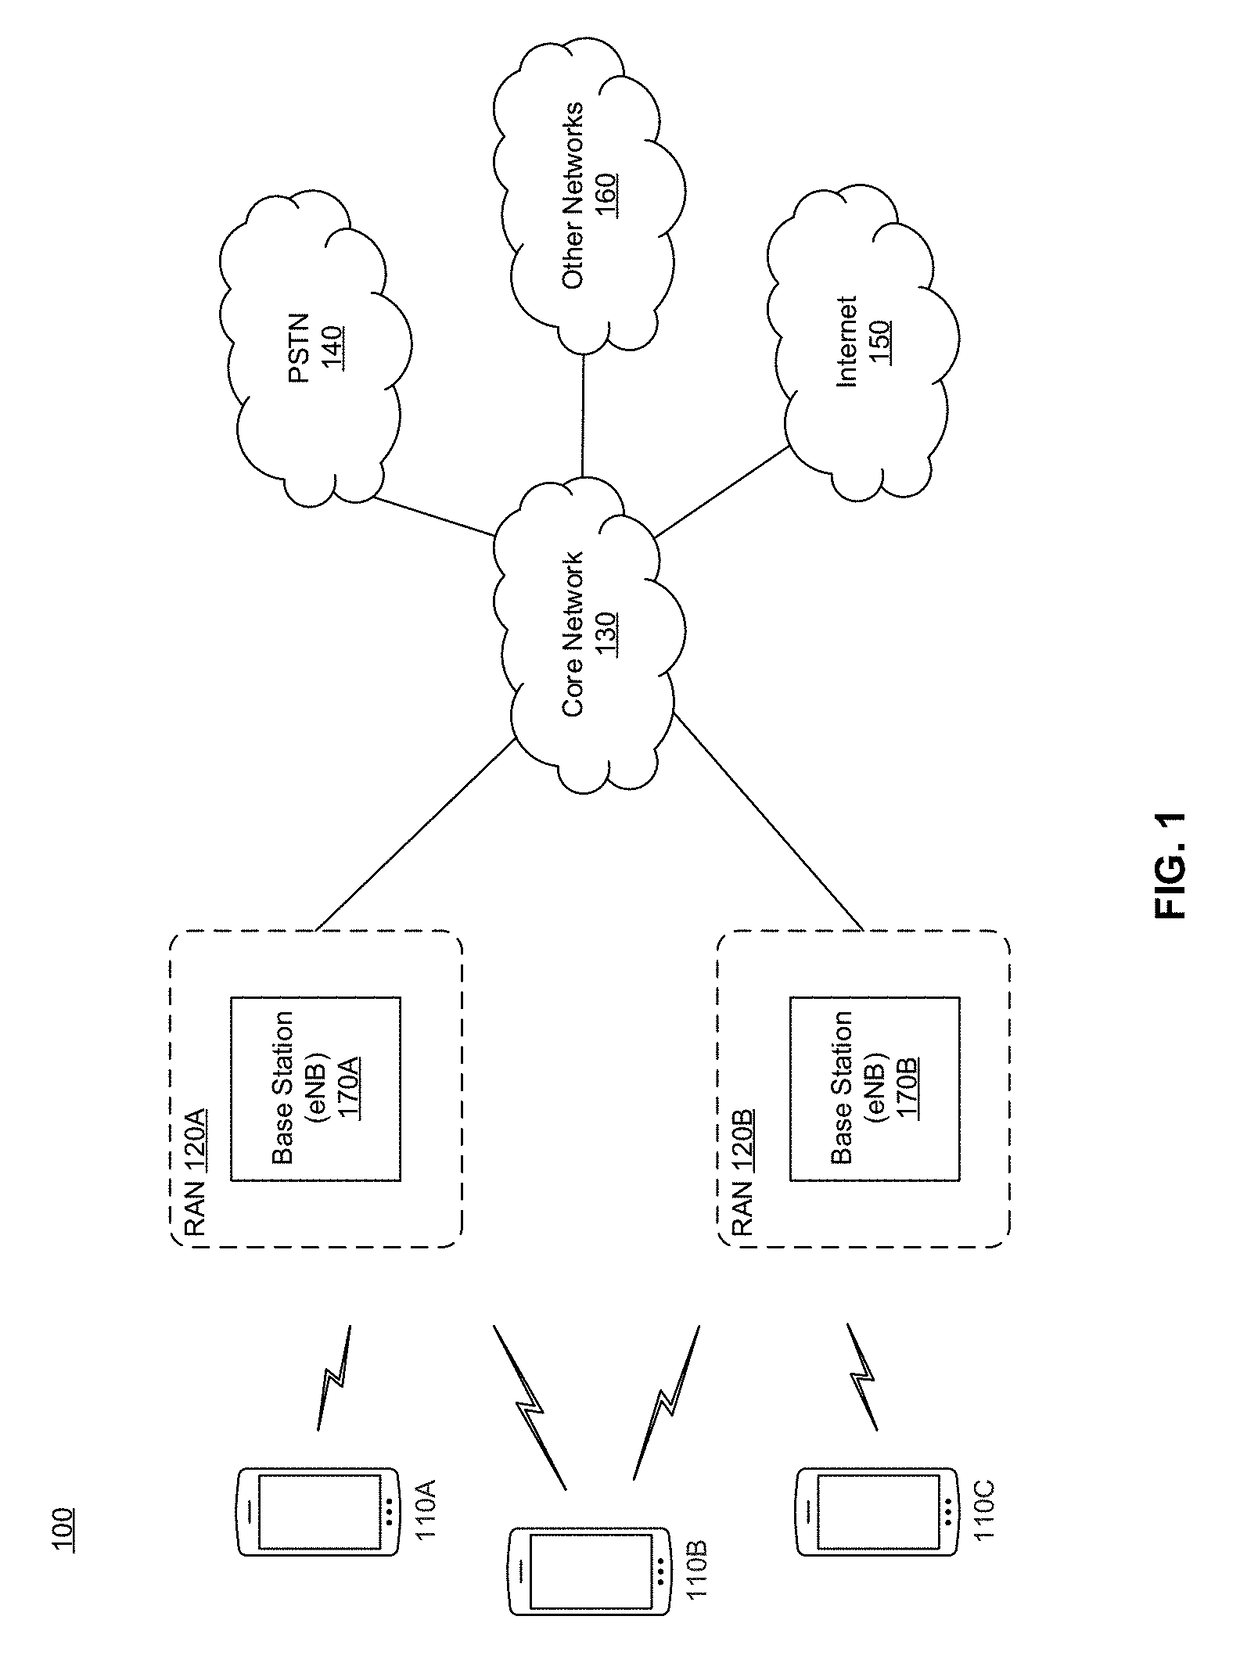 Root cause analysis in a communication network via probabilistic network structure